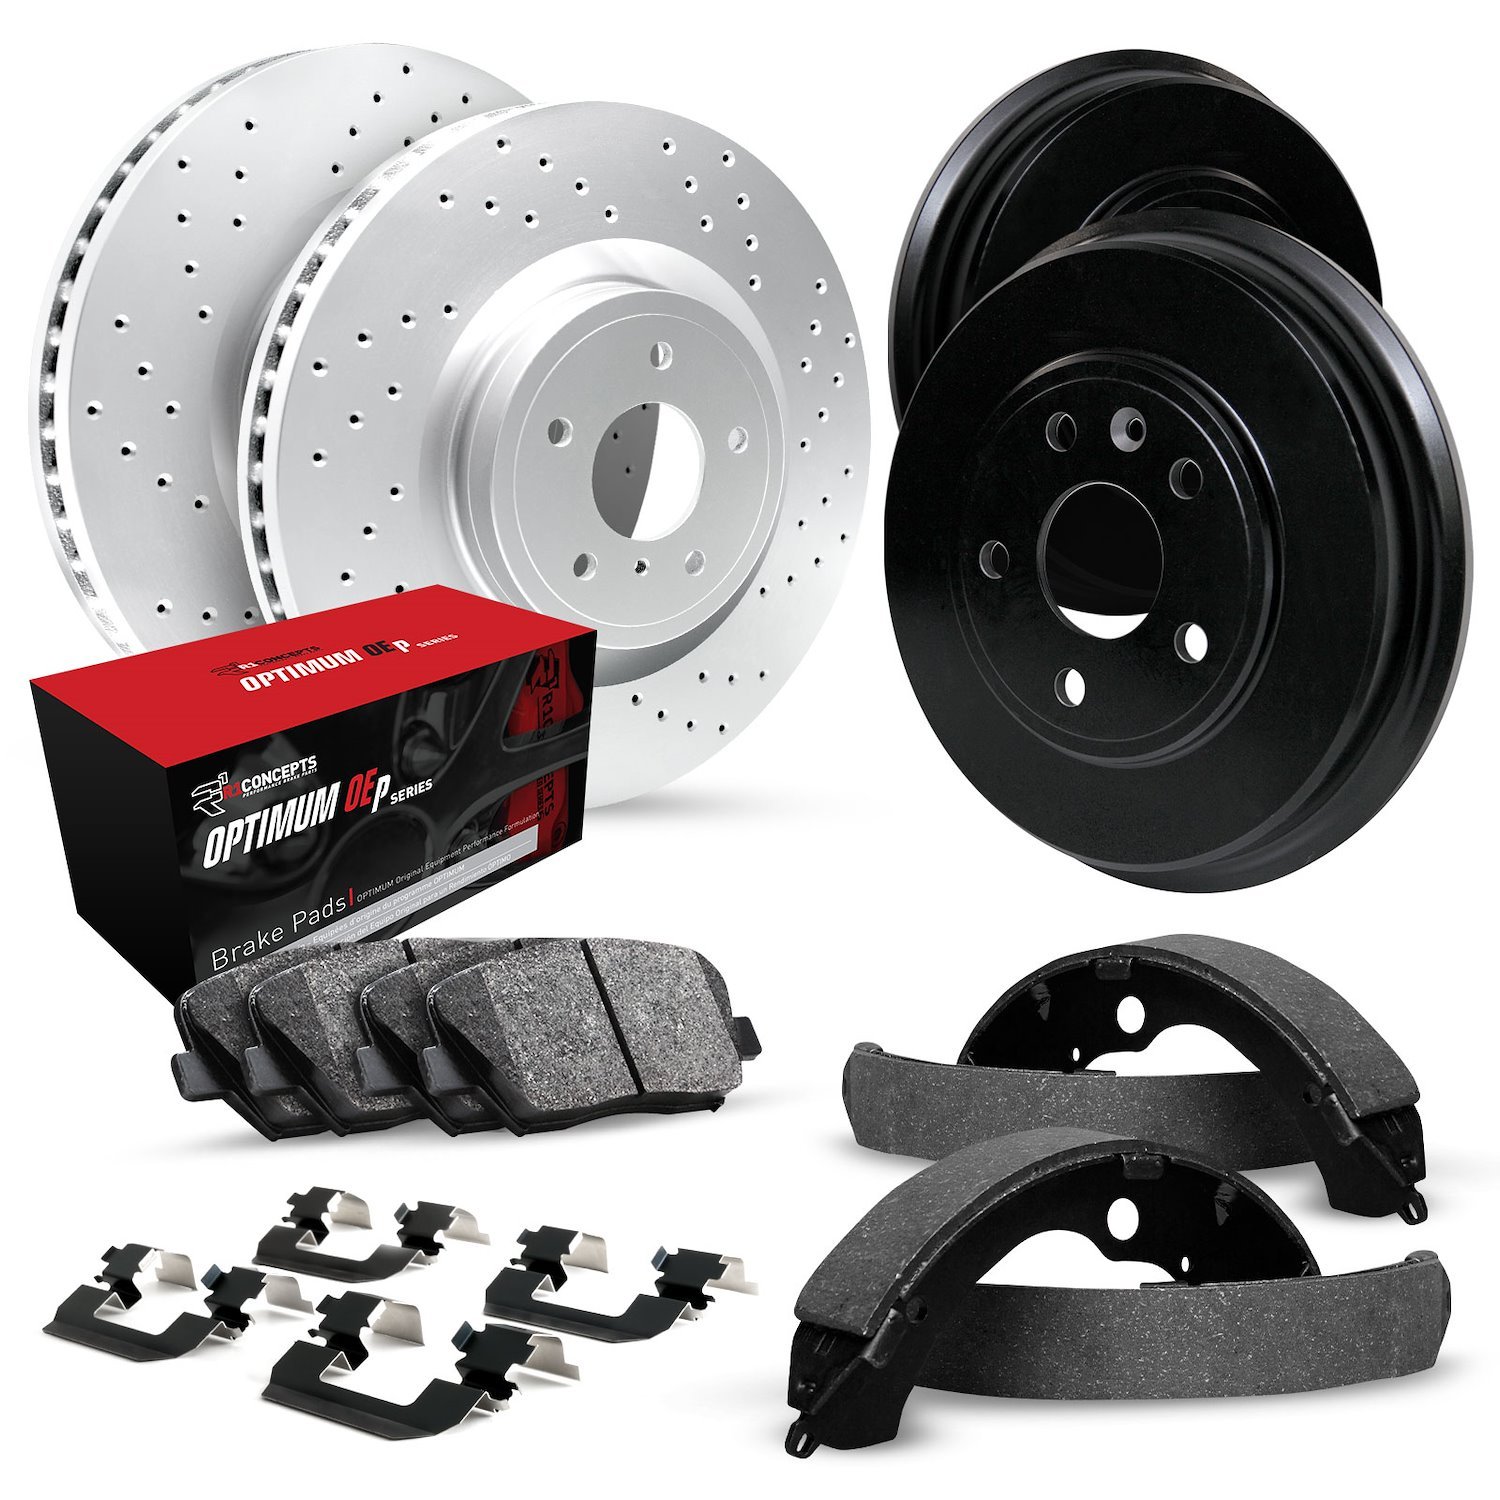 GEO-Carbon Drilled Brake Rotor & Drum Set w/Optimum OE Pads, Shoes, & Hardware, 1990-1997 Acura/Honda, Position: Front & Rear